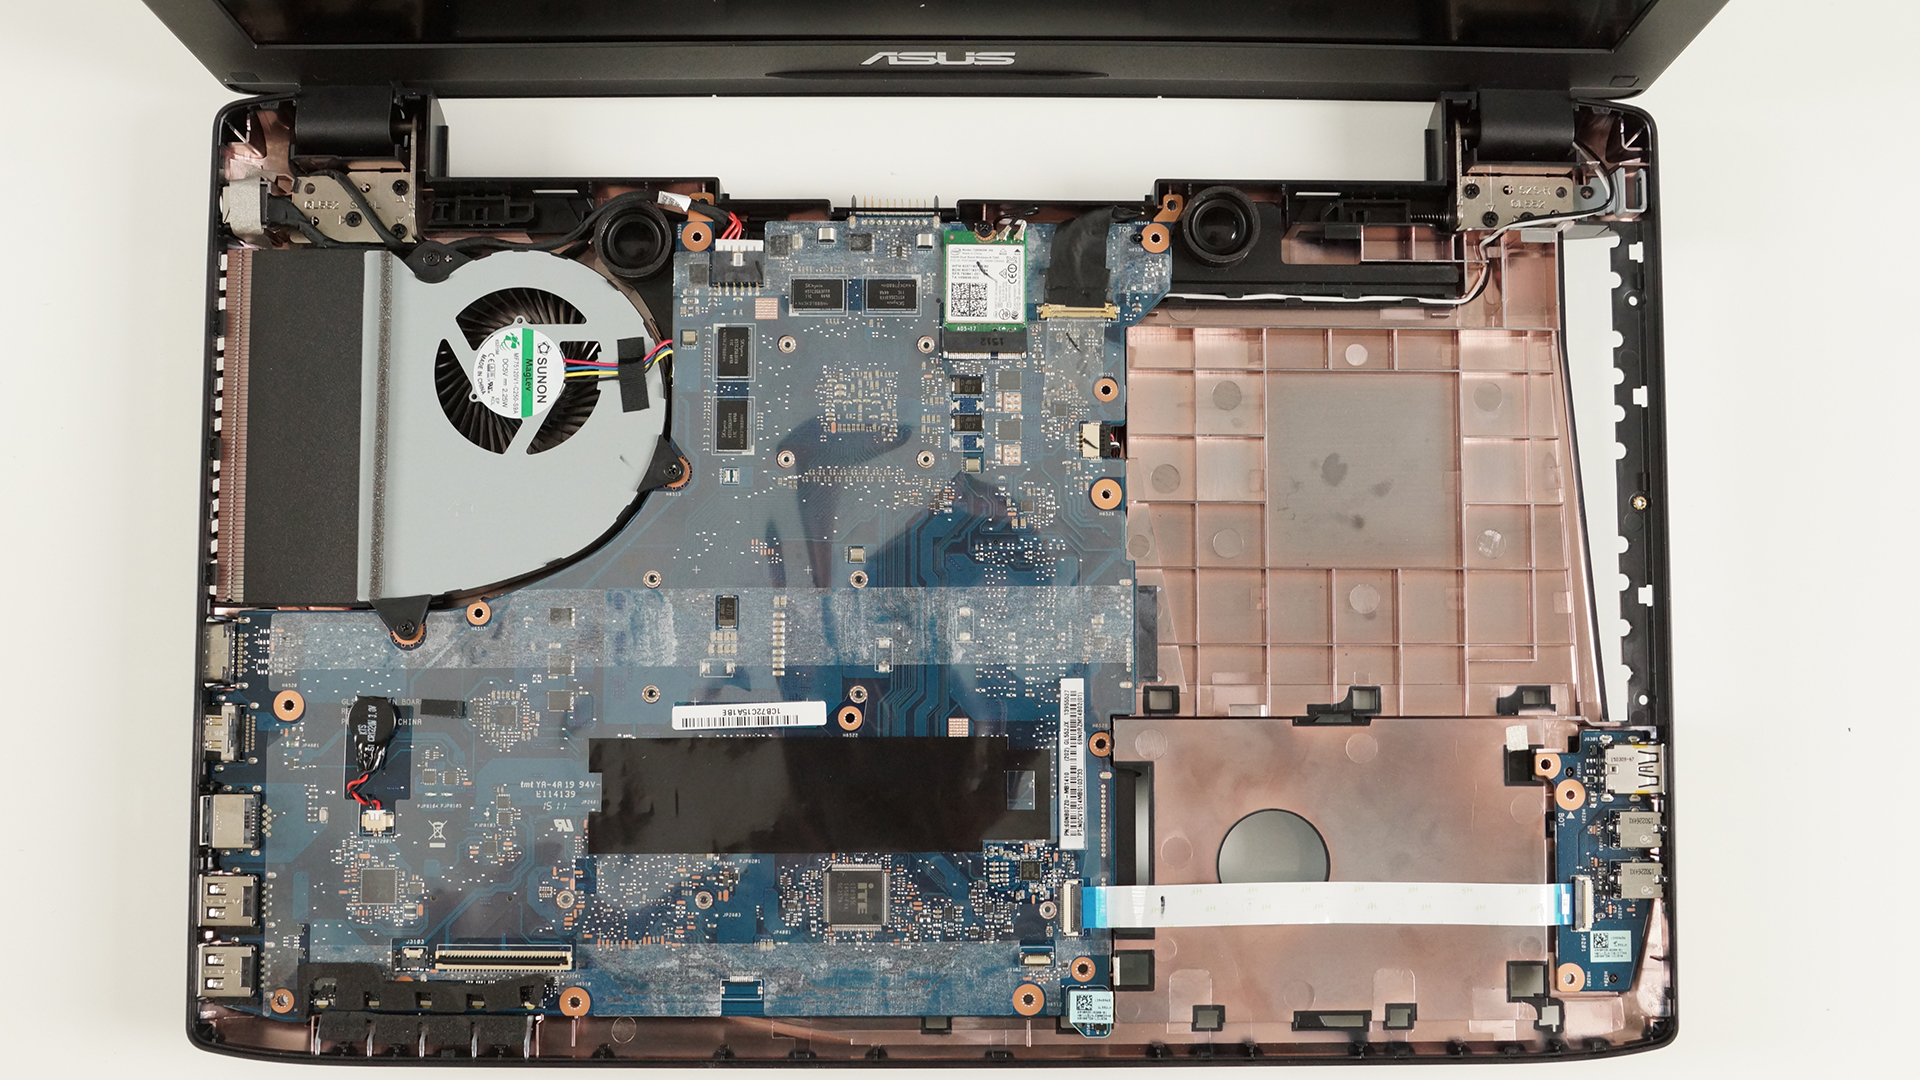 Inside ASUS ROG GL552 - disassembly, photos and upgrade |